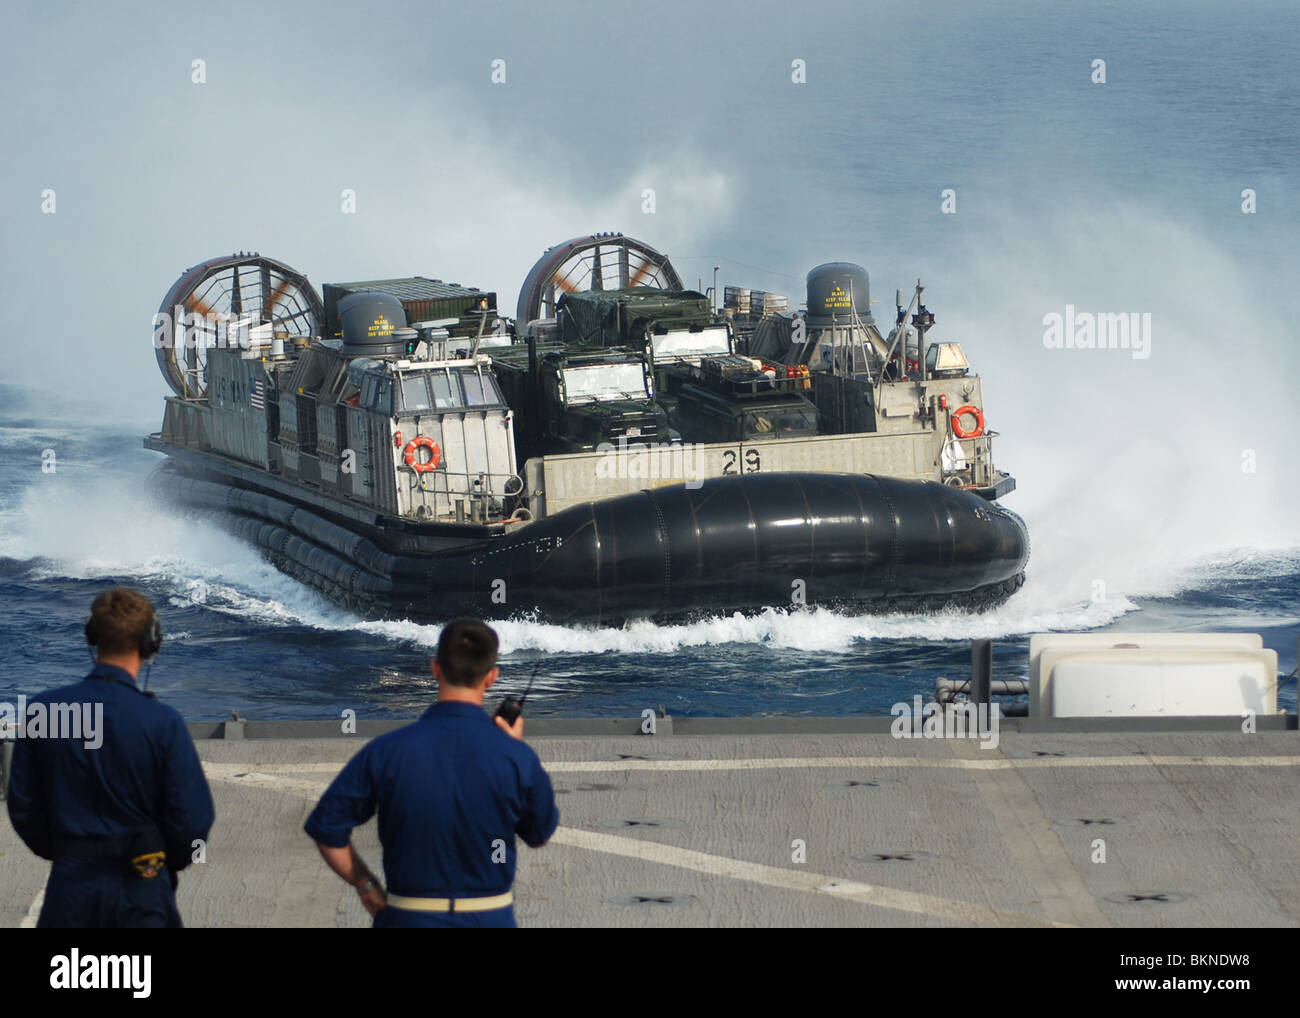 SEA OF JAPAN Sailors observe the Landing Craft Air Cushion (LCAC) 29 assigned to Assault Craft Unit (ACU) 5 Stock Photo